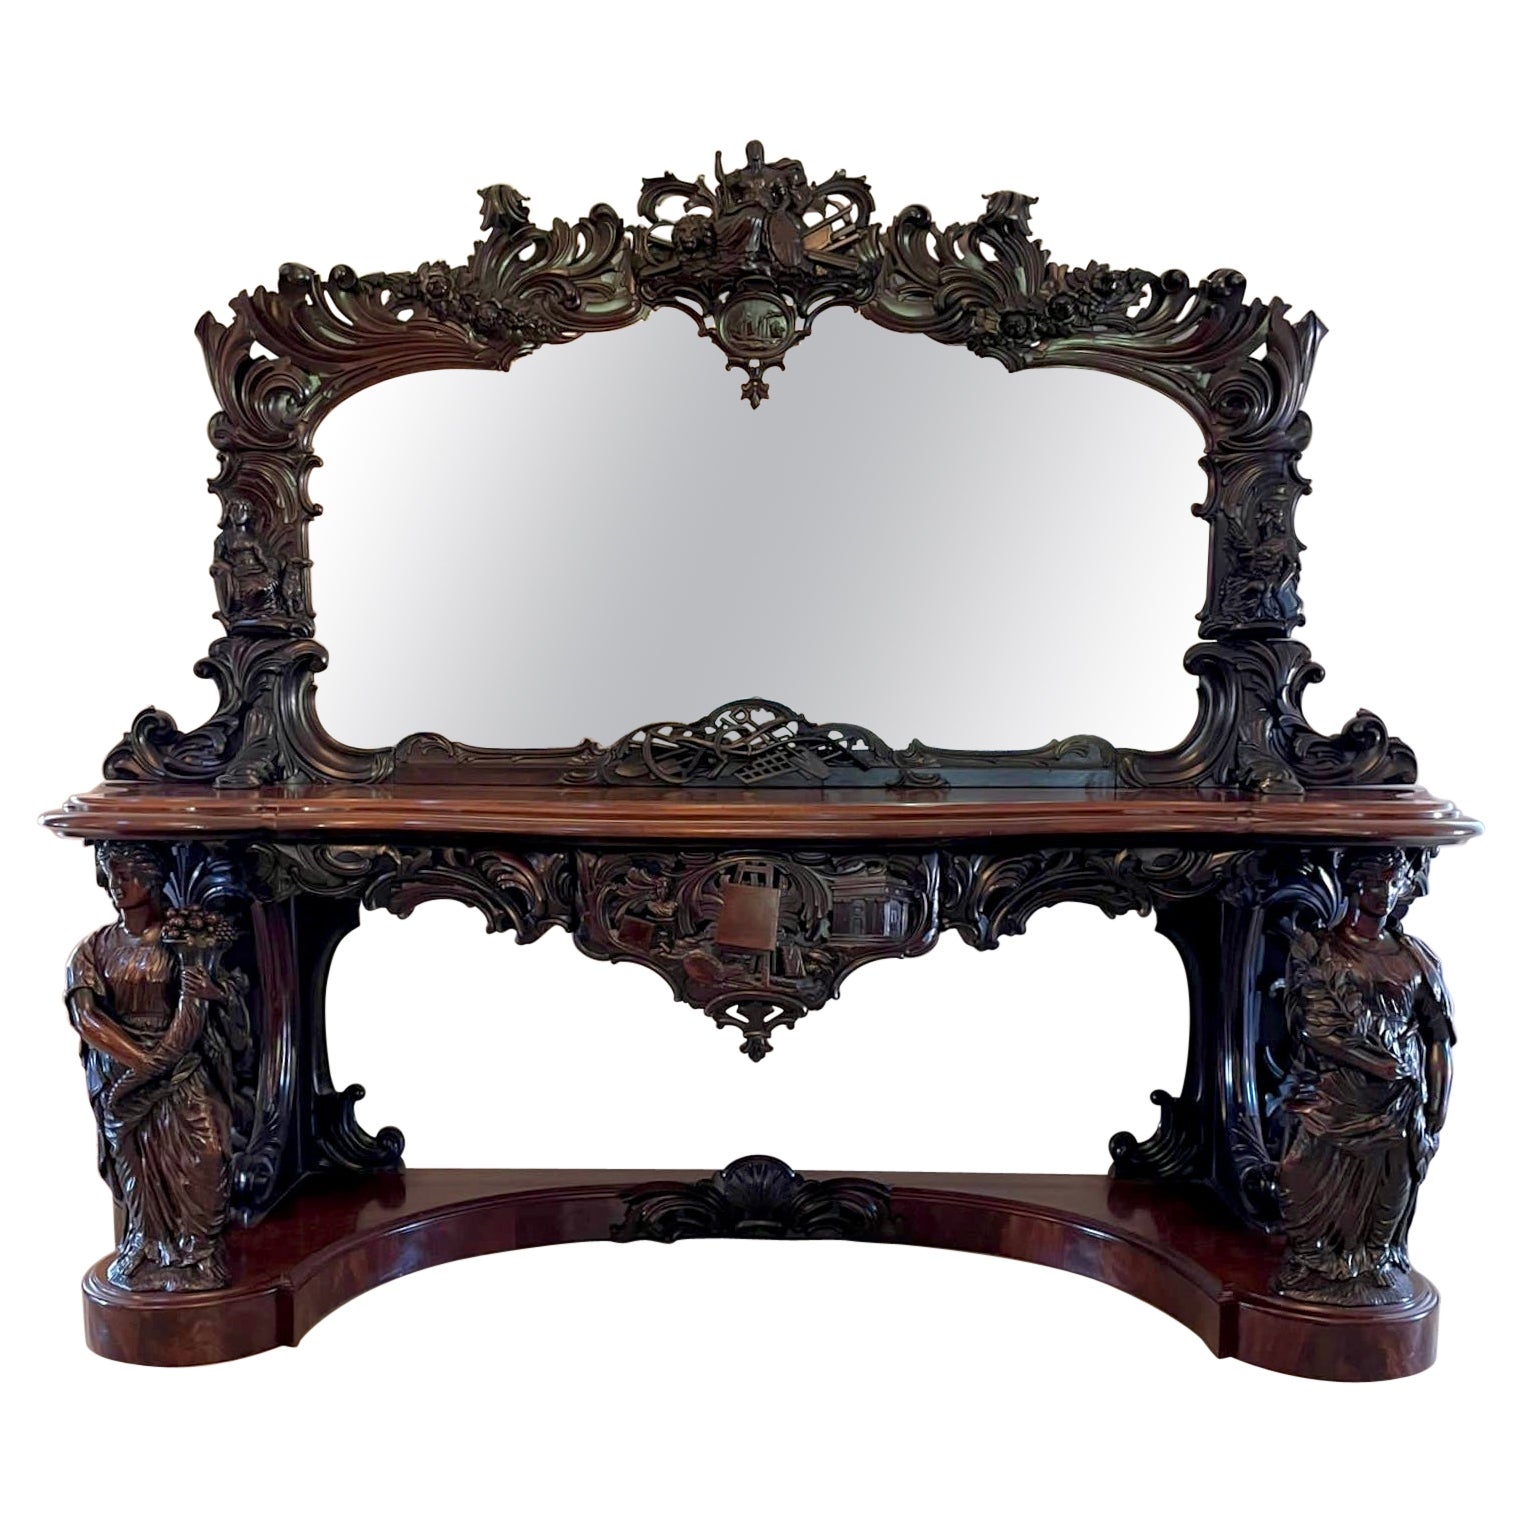 Extremely Large Exhibition Quality Antique Mahogany Mirror Back Console Table